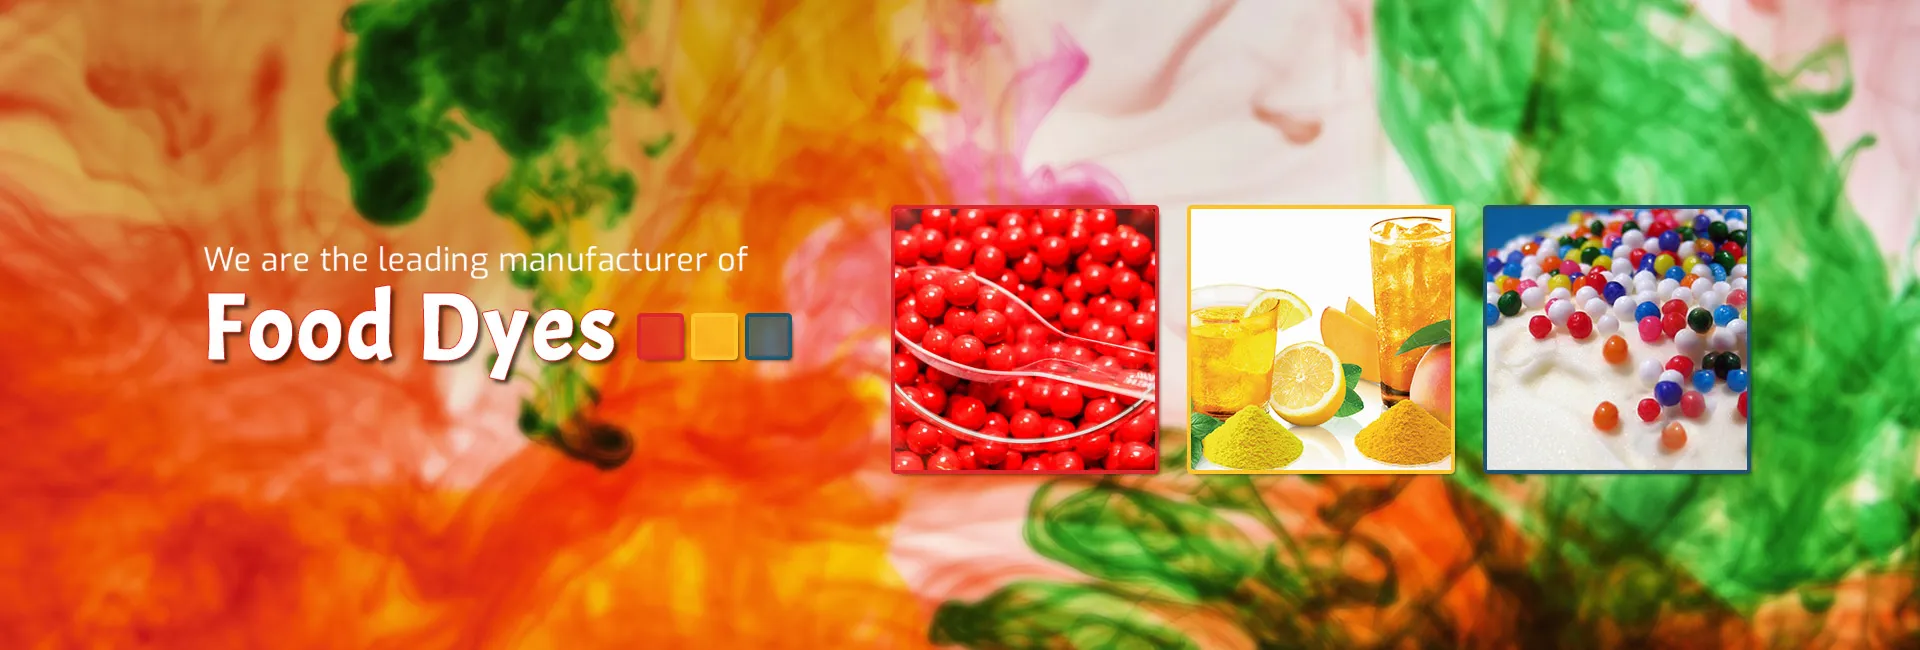 Food Dyes Manufacturer & Suppliers in Spain